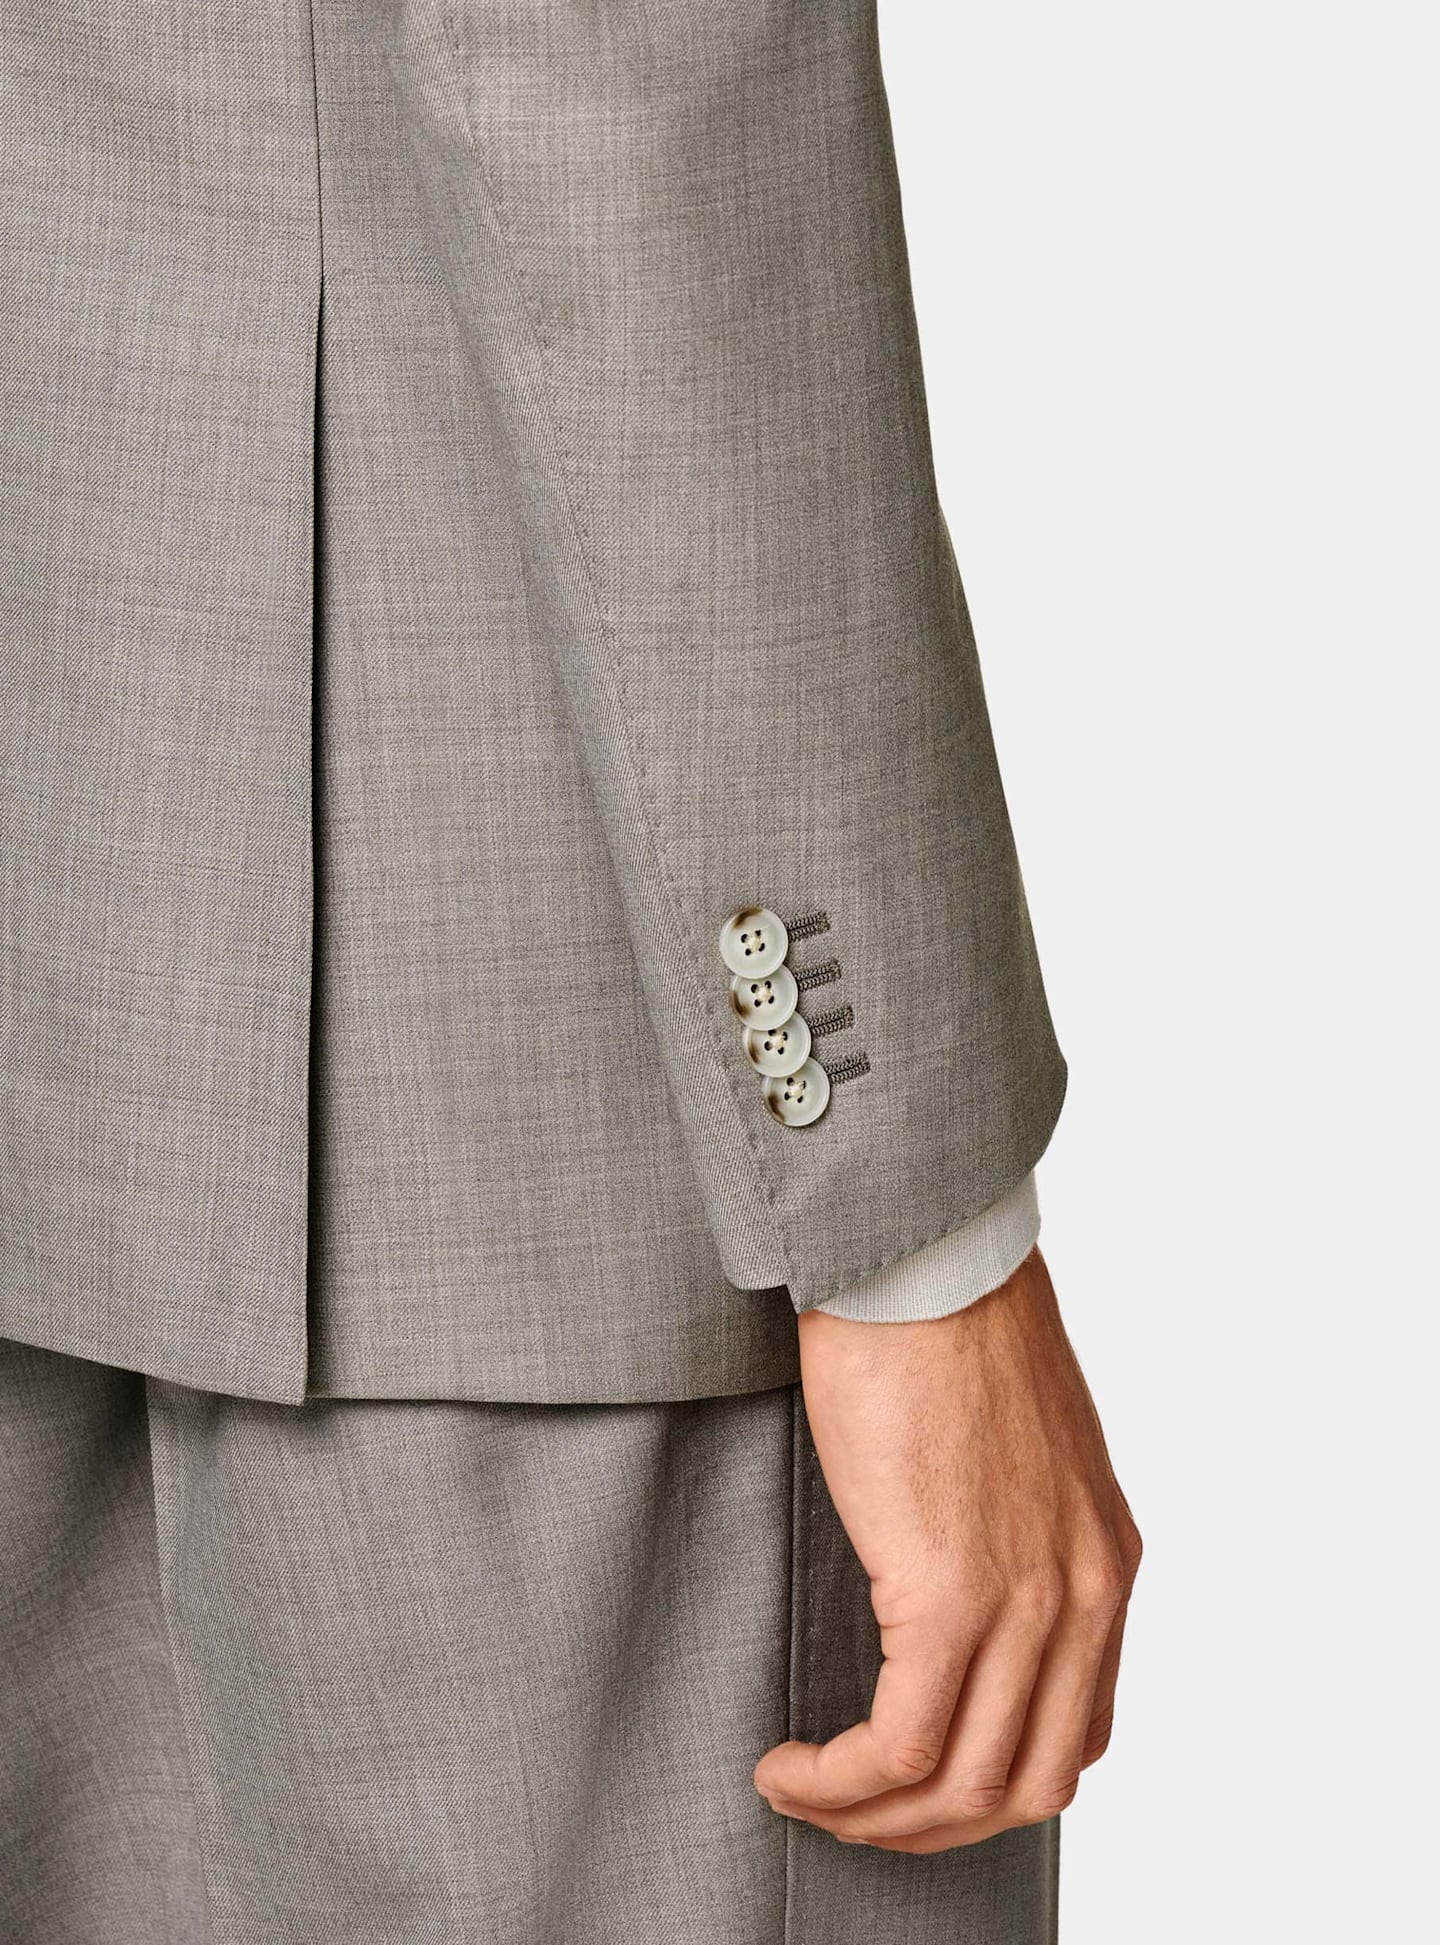 Detail of taupe single-breasted suit sleeve.